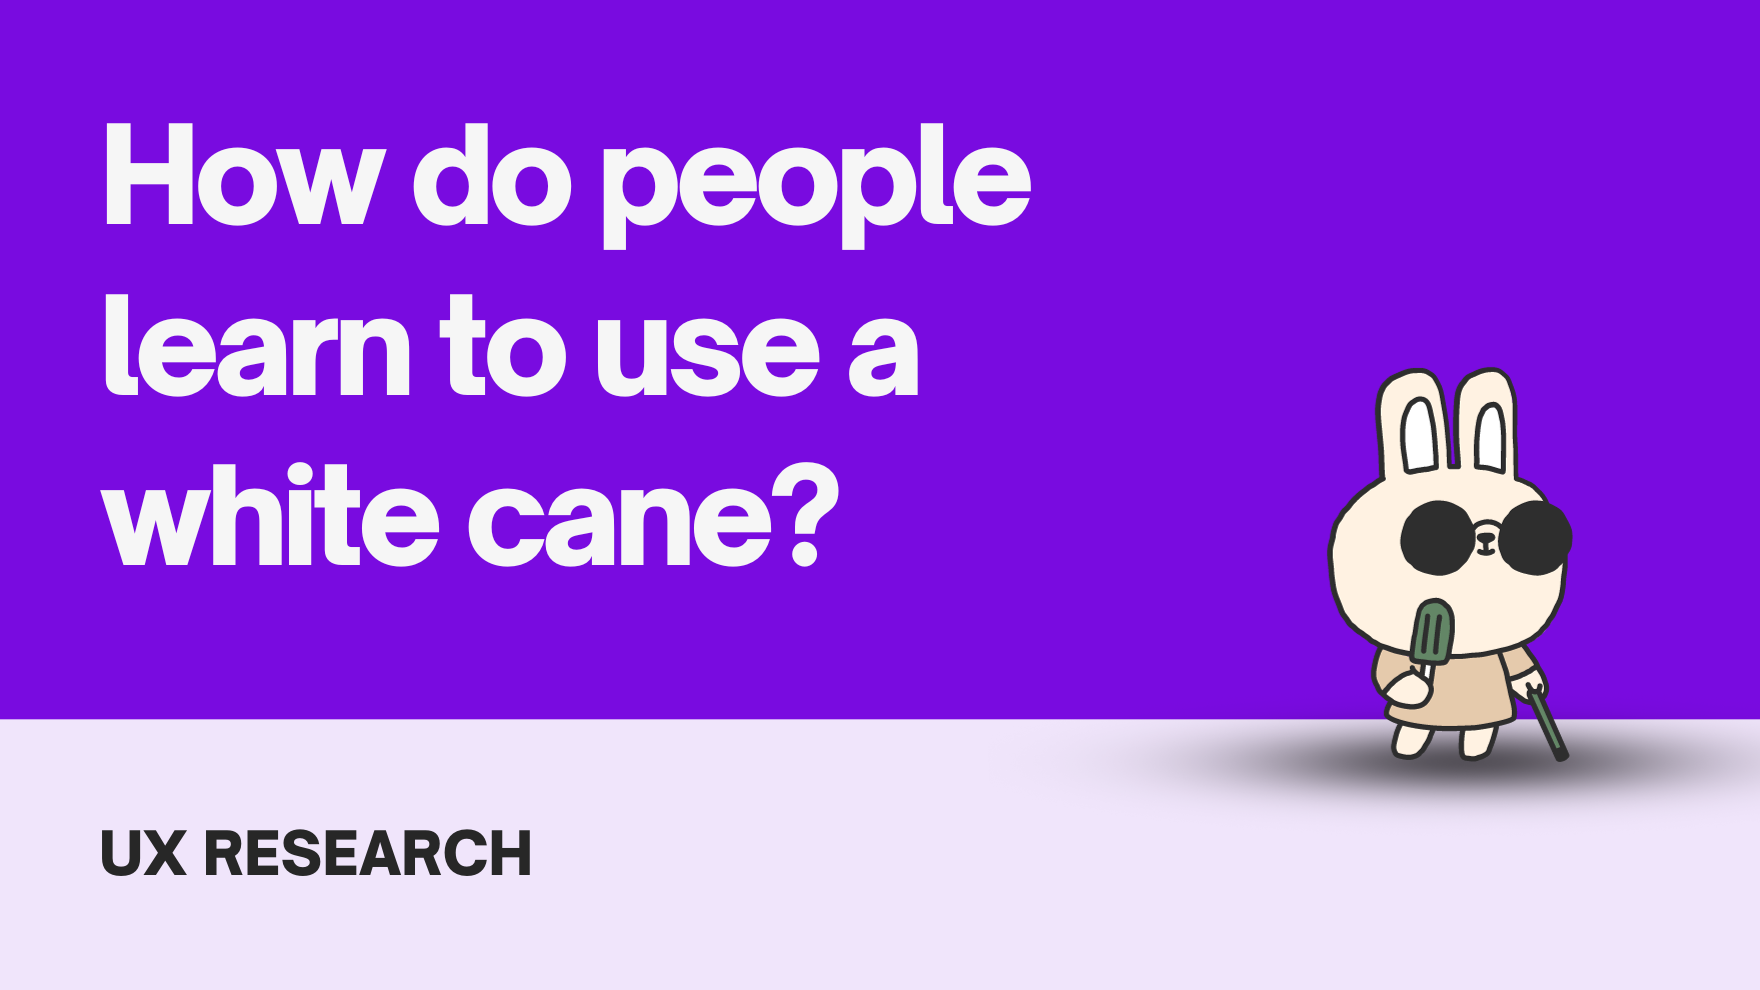 How do people learn to use a white cane?